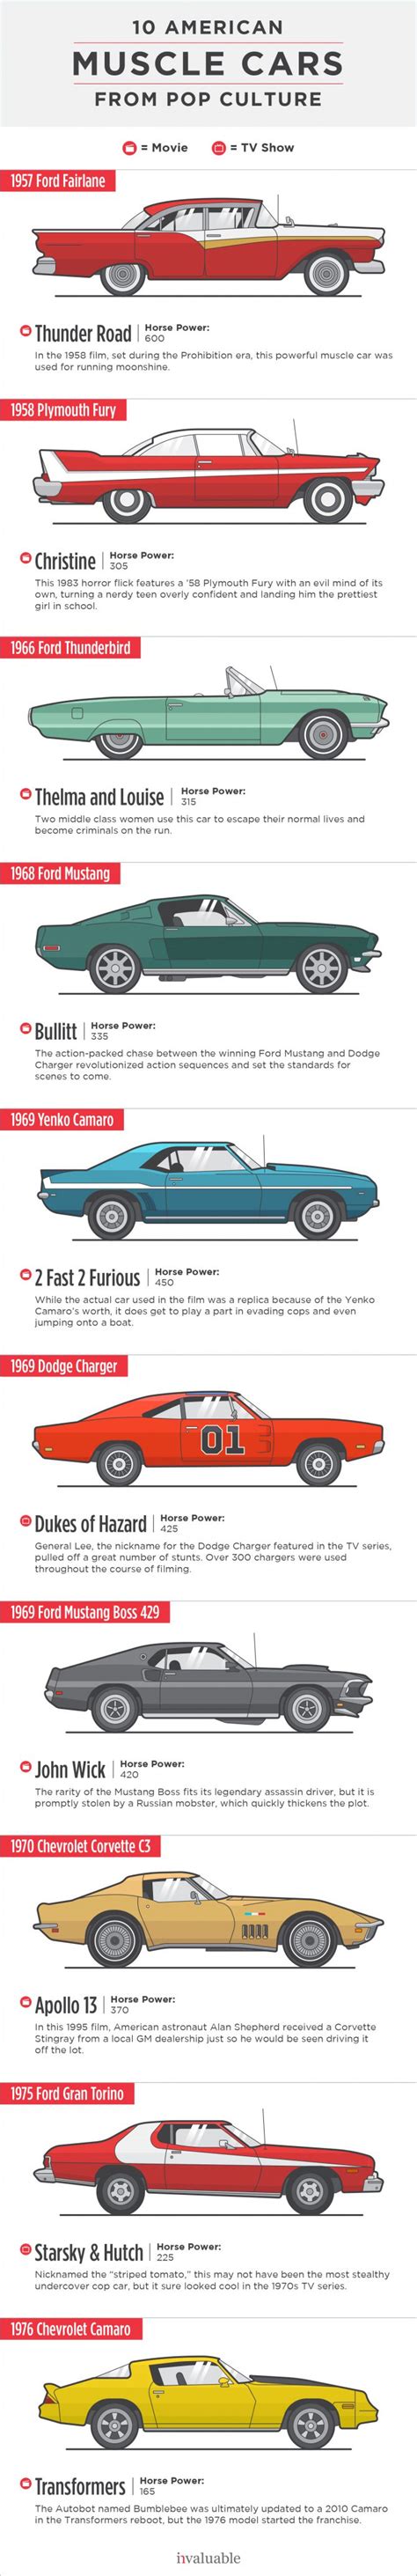 10 Famous American Muscle Cars From Pop Culture